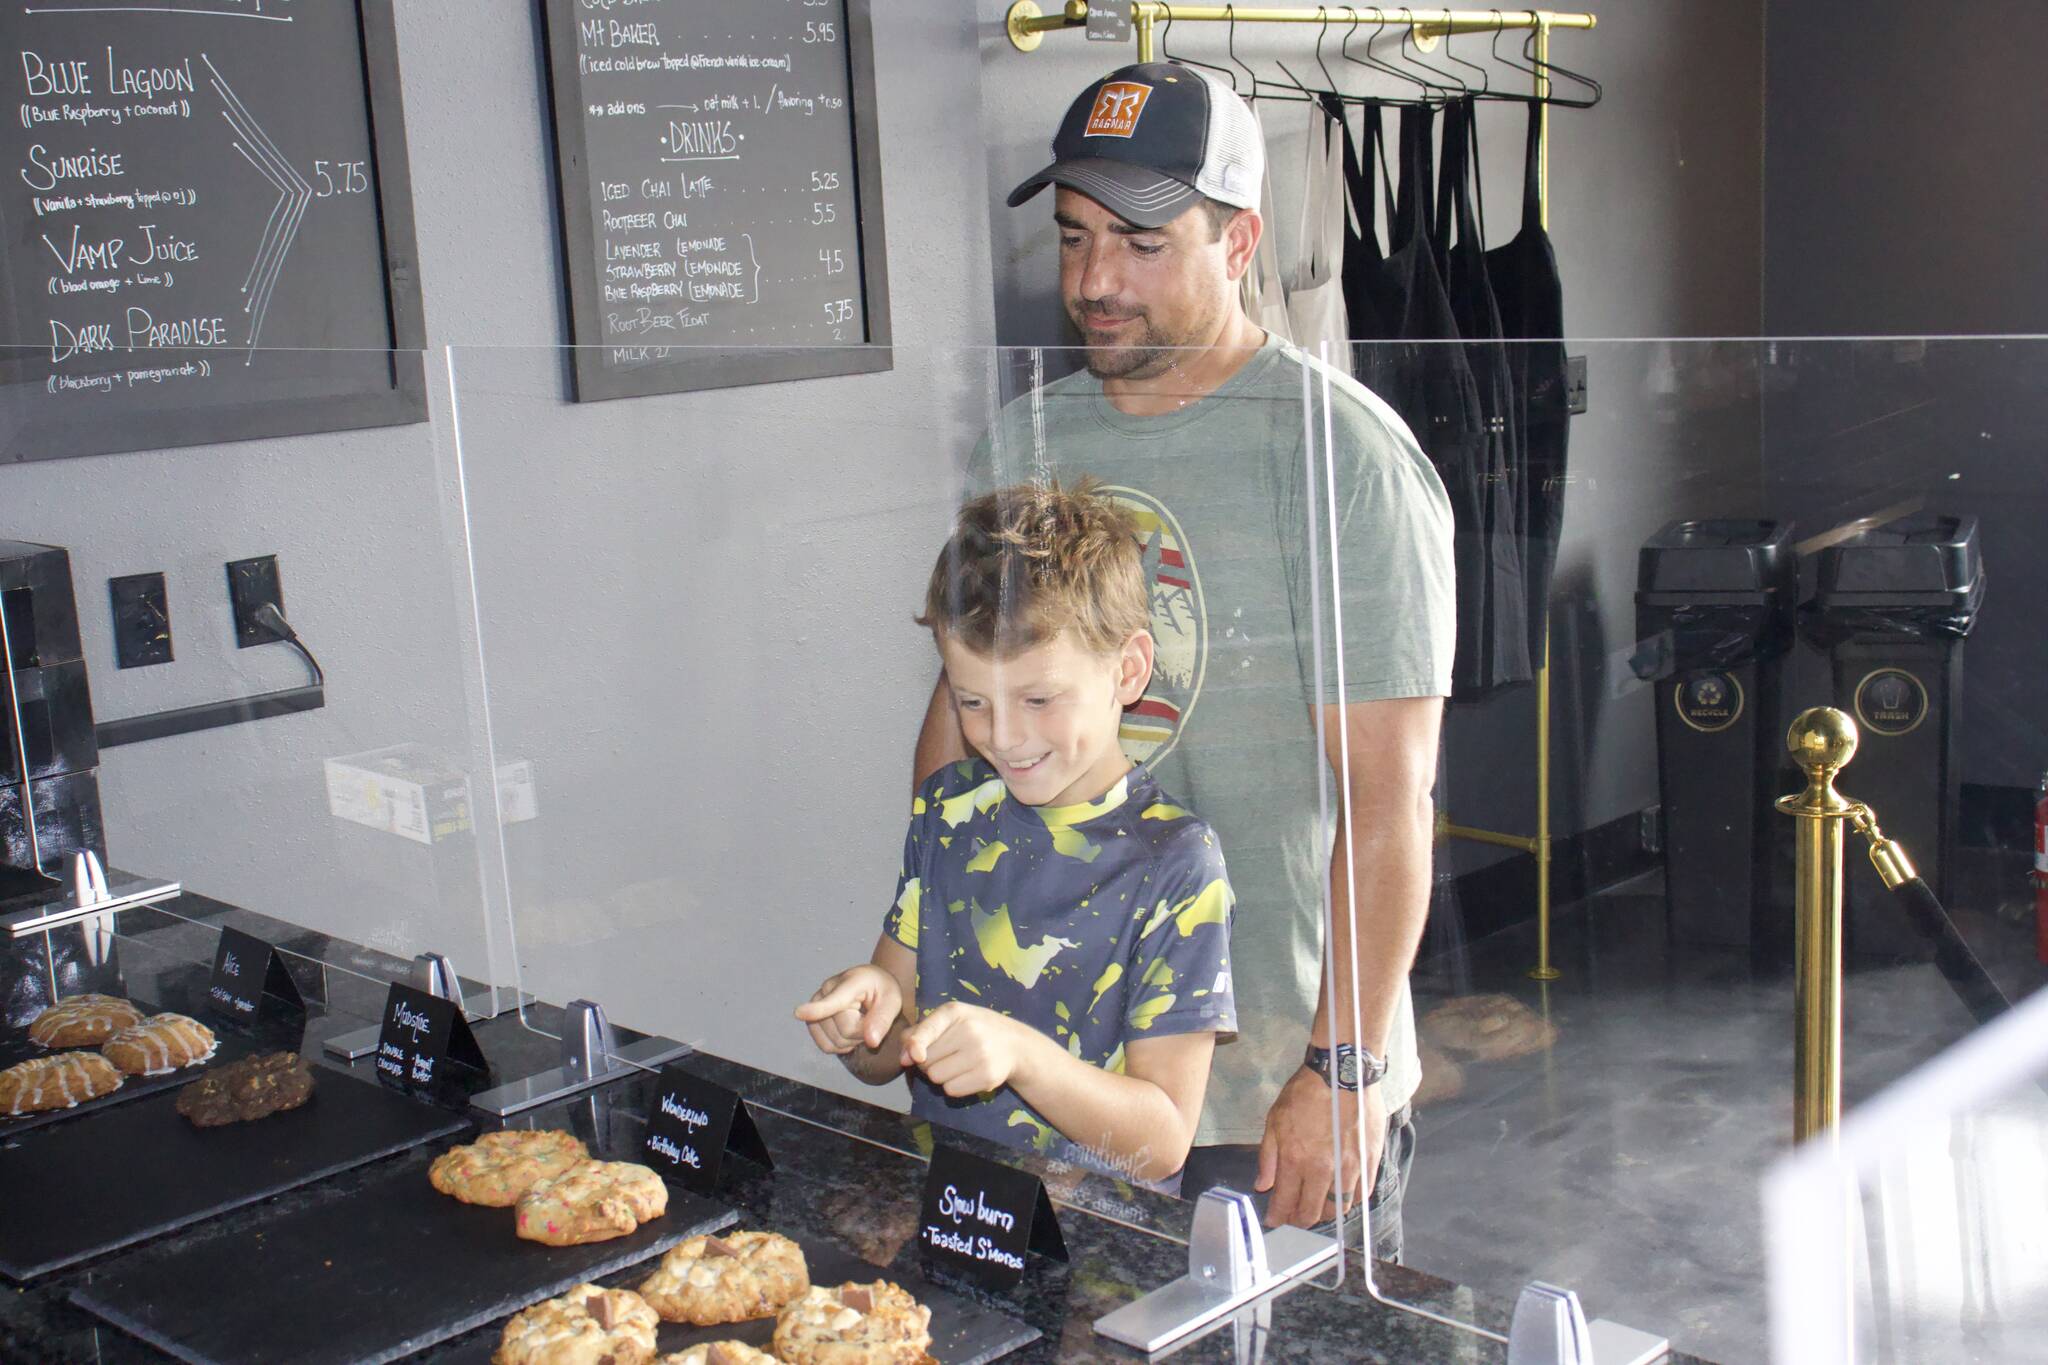 Photo by Rachel Rosen/Whidbey News-Times
Andrew Leith and his son Drew order Mad Batter cookies.